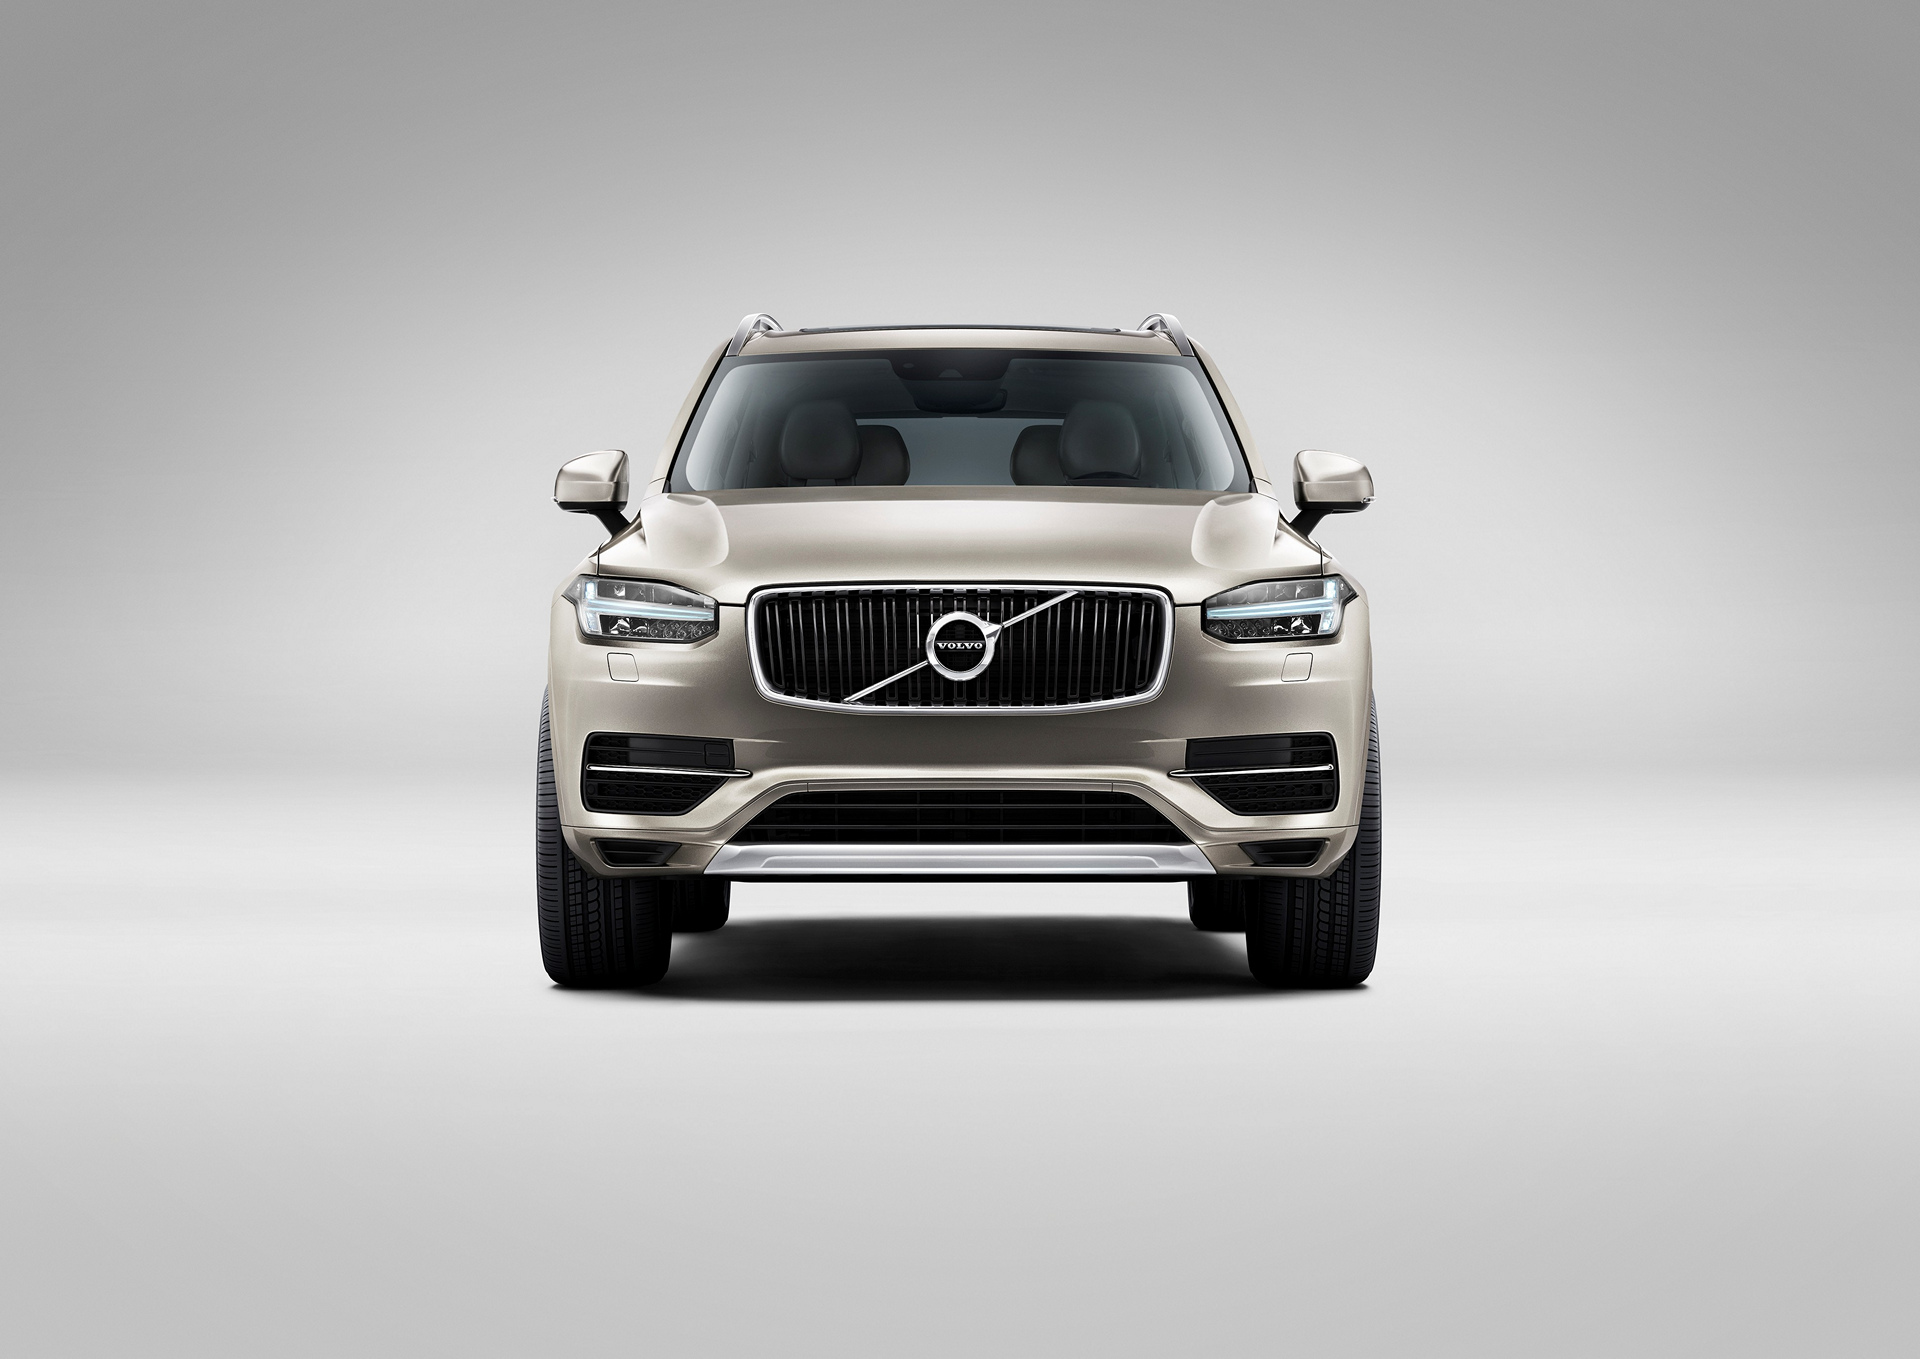  Volvo XC90 © Zhejiang Geely Holding Group Co., Ltd